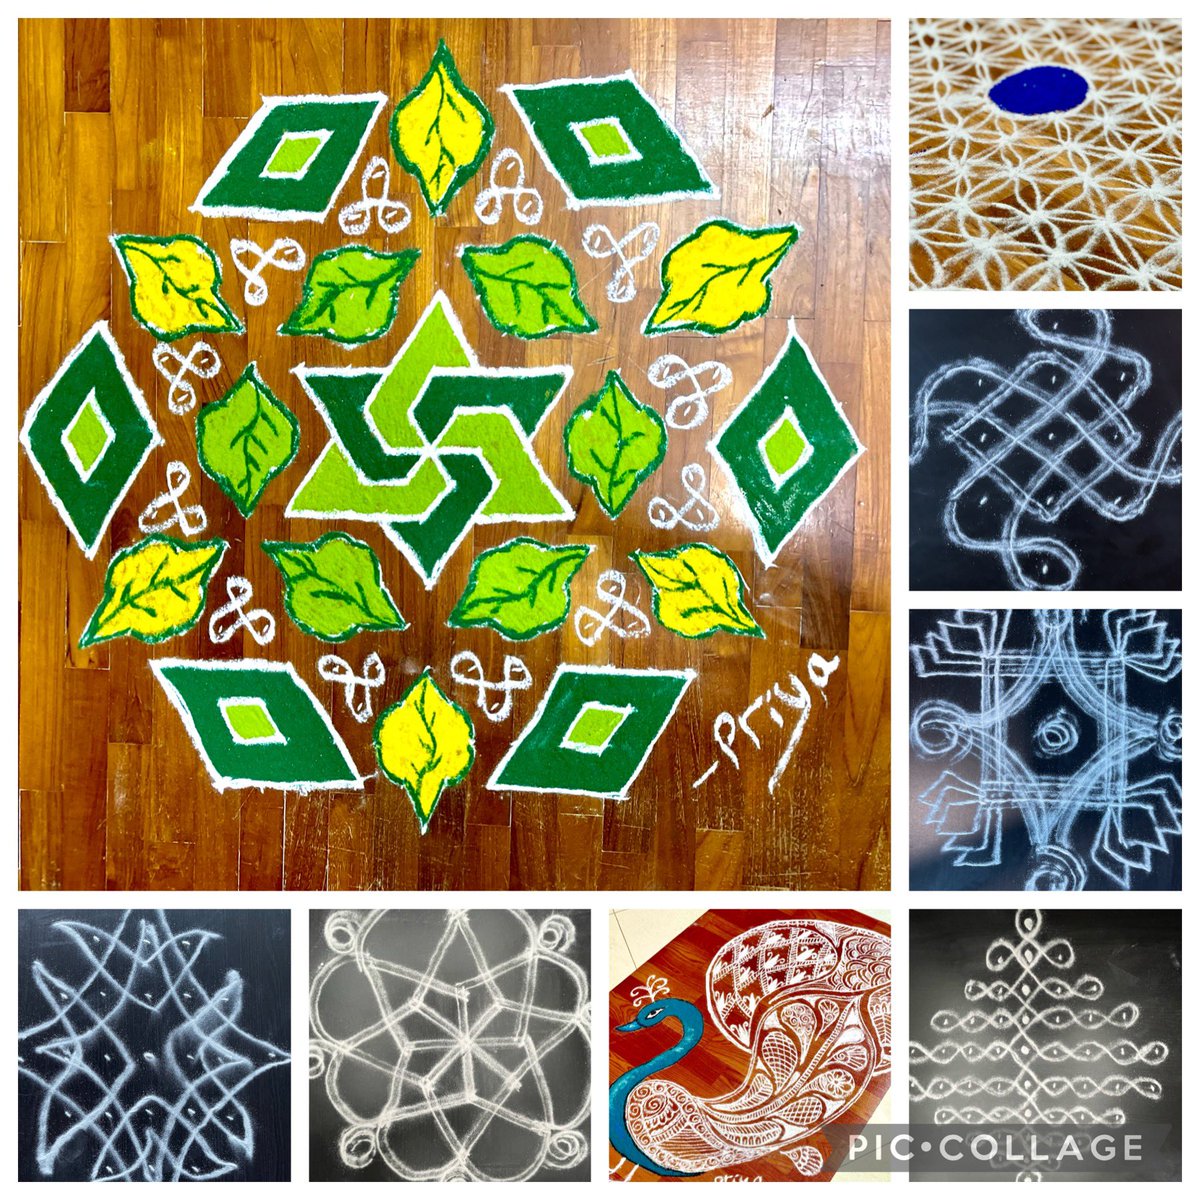 #the100dayproject  my day 5 to 15 , 100 days of drawing kolams on the floor. My #meditativepractice #wellbeing #arttherapy @sandteachtrust1